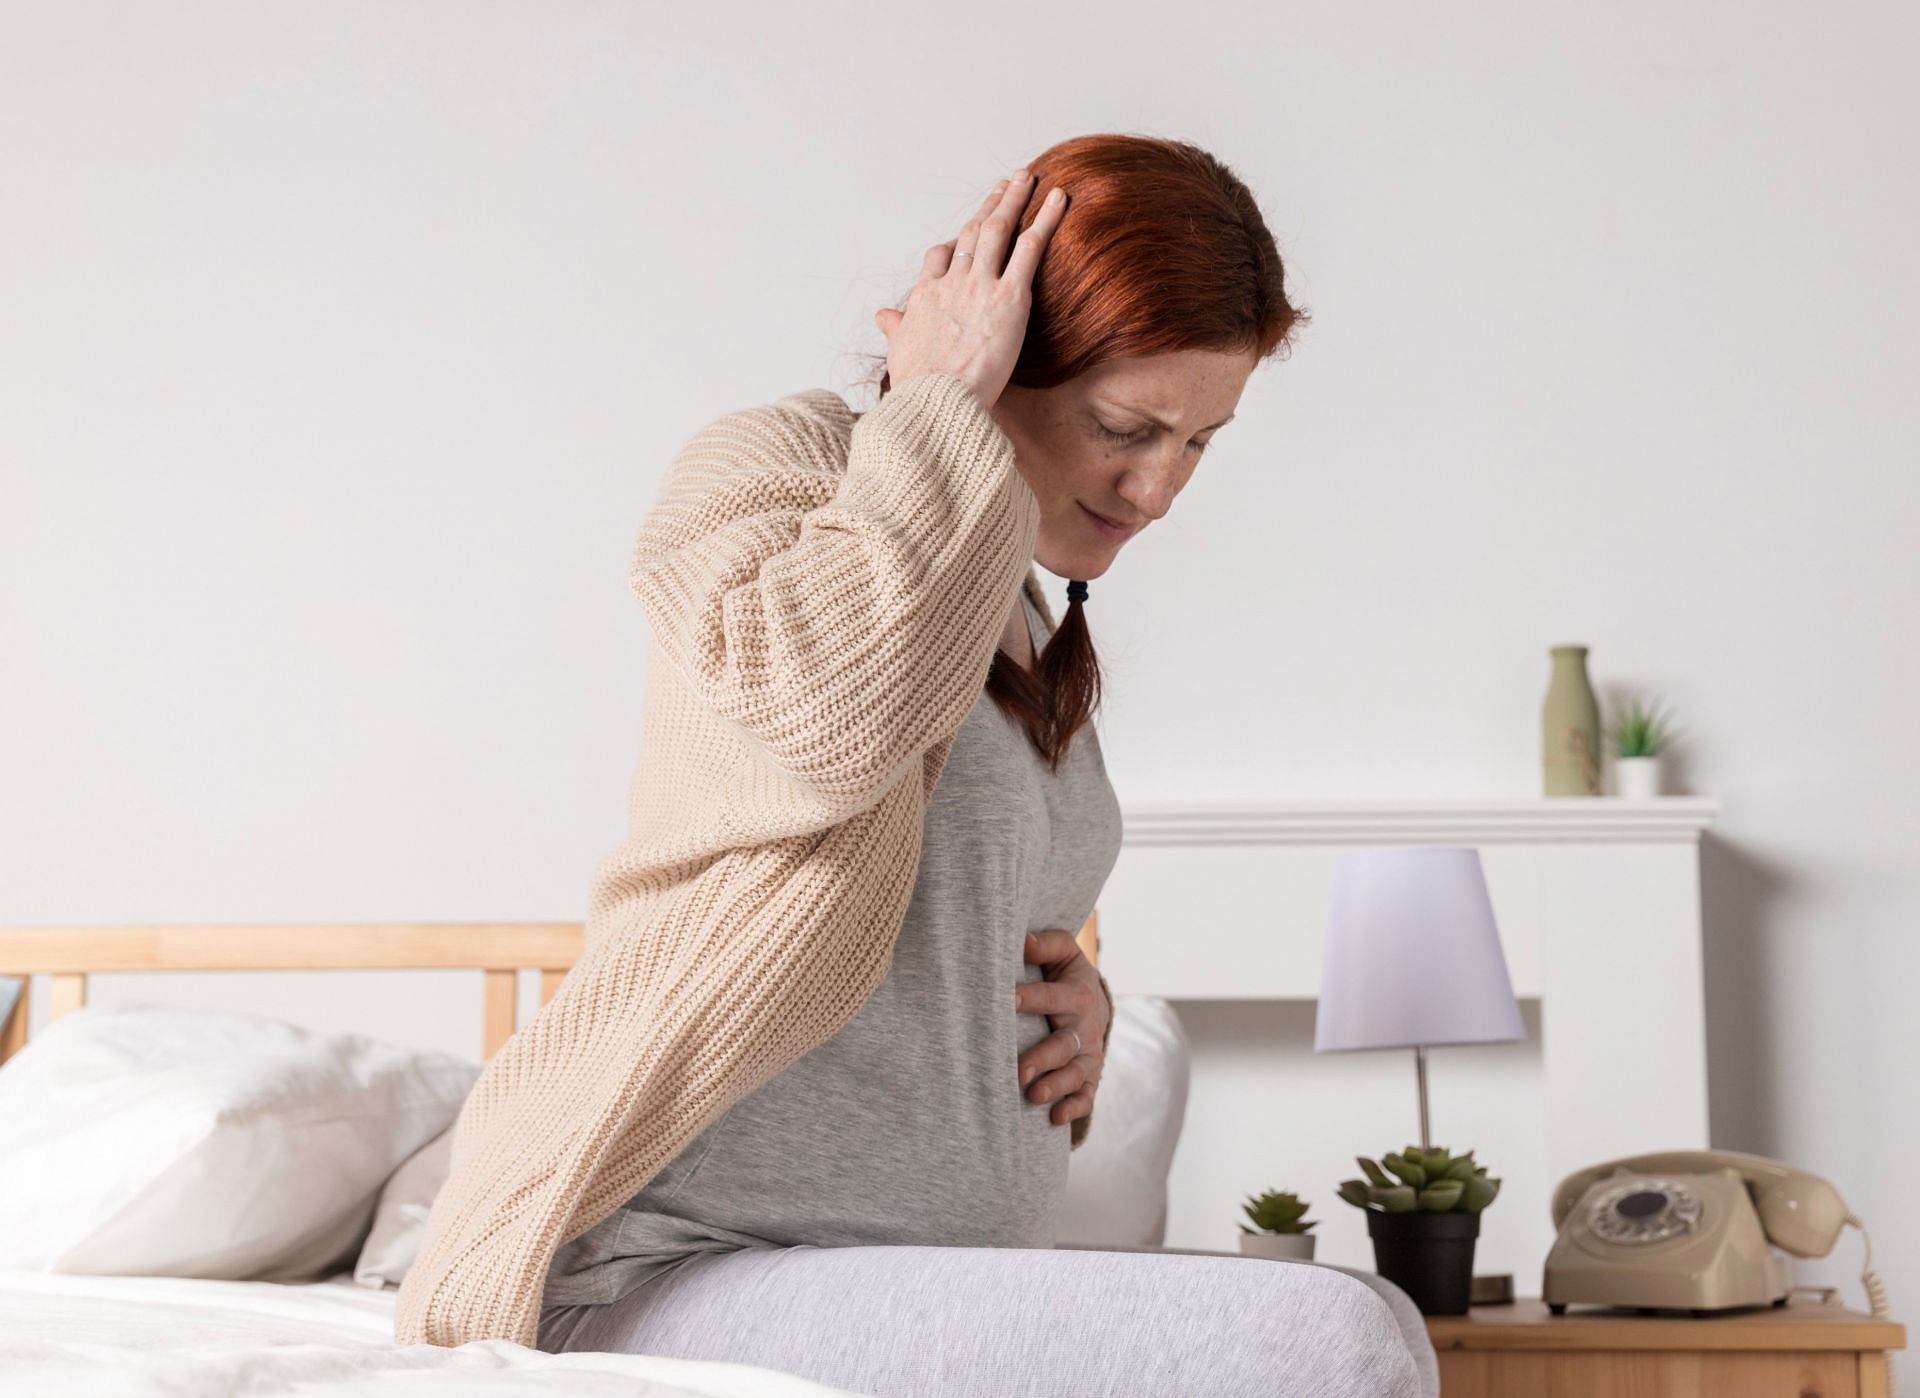 How can mothers manage anxiety during pregnancy? (Image via Freepik/ Freepik)